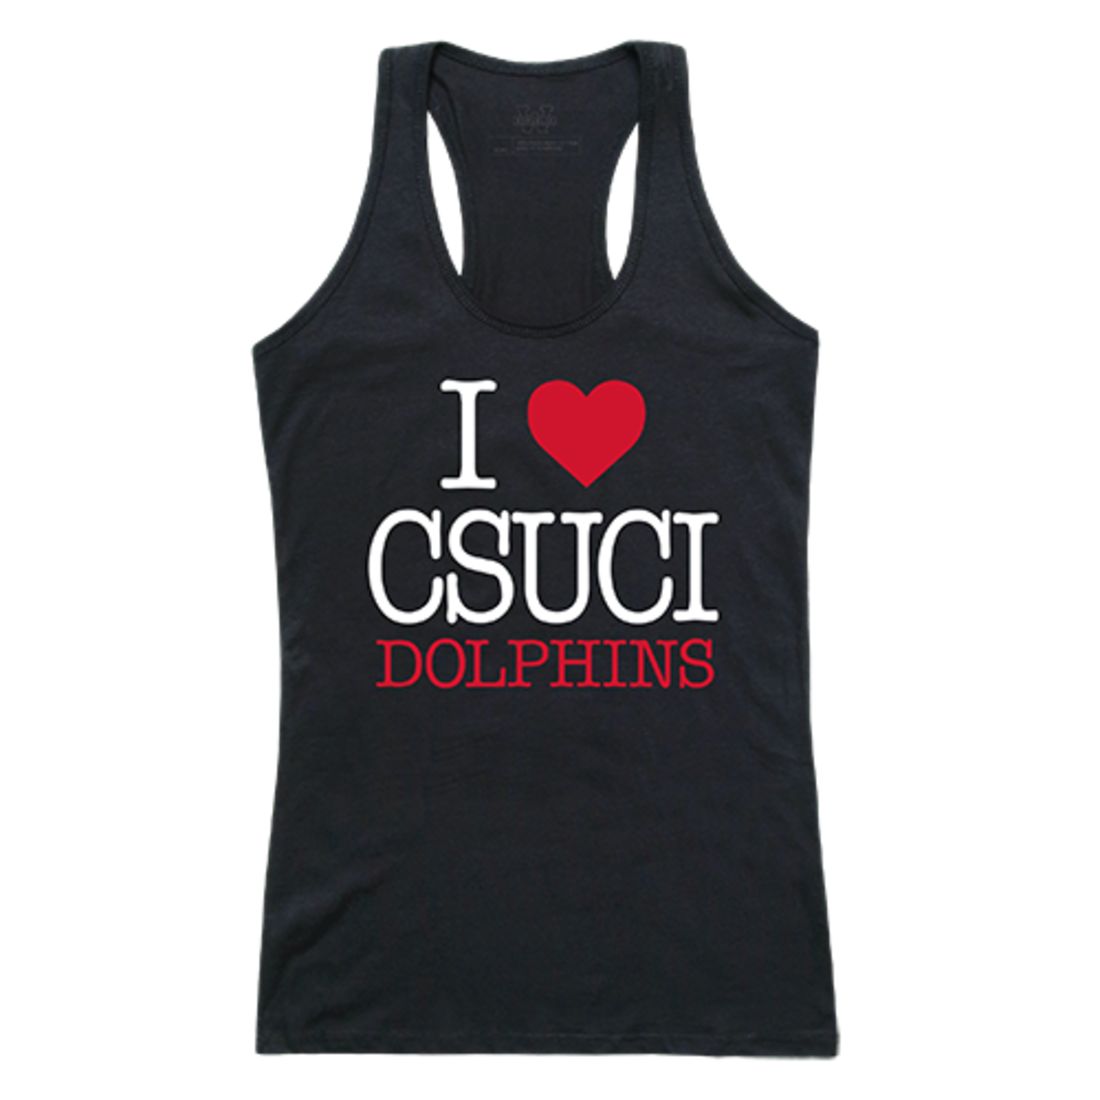 CSUCI CalIfornia State University Channel Islands The Dolphins Womens Love Tank Top Tee T-Shirt Black-Campus-Wardrobe